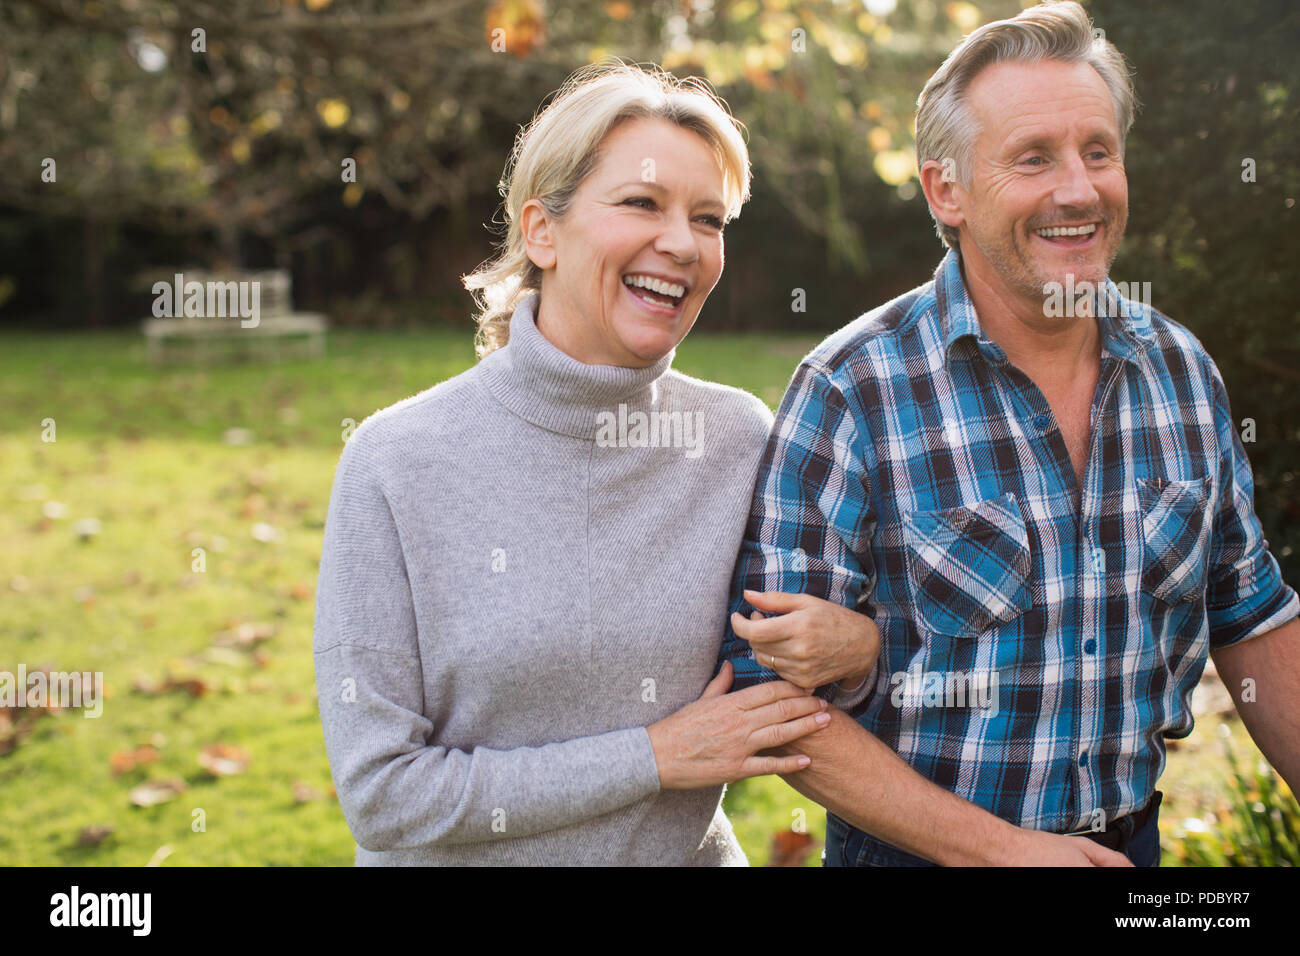 Happy, carefree mature couple walking arm in arm in sunny autumn park Stock Photo